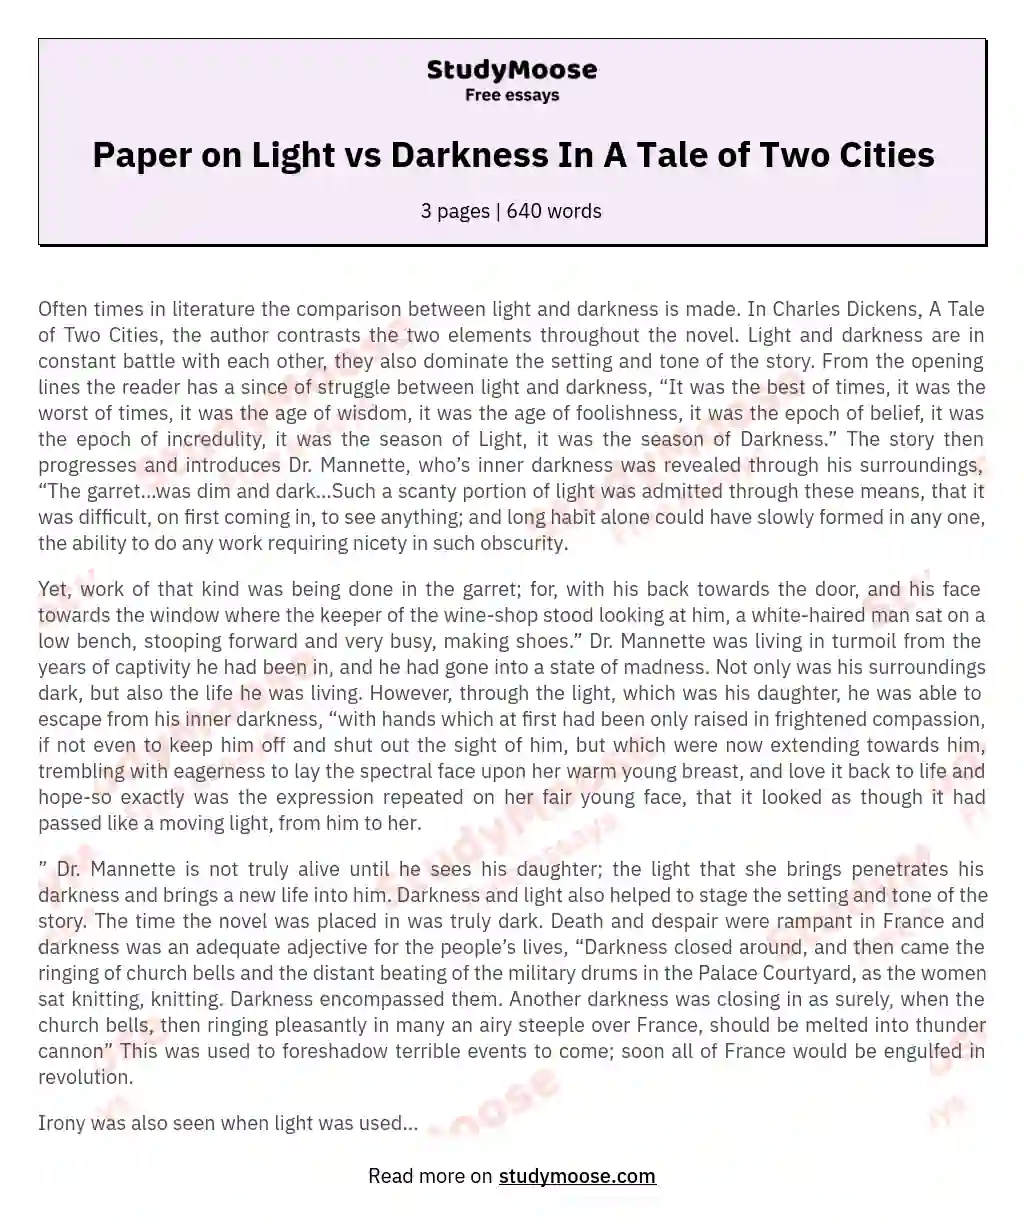 Paper on Light vs Darkness In A Tale of Two Cities